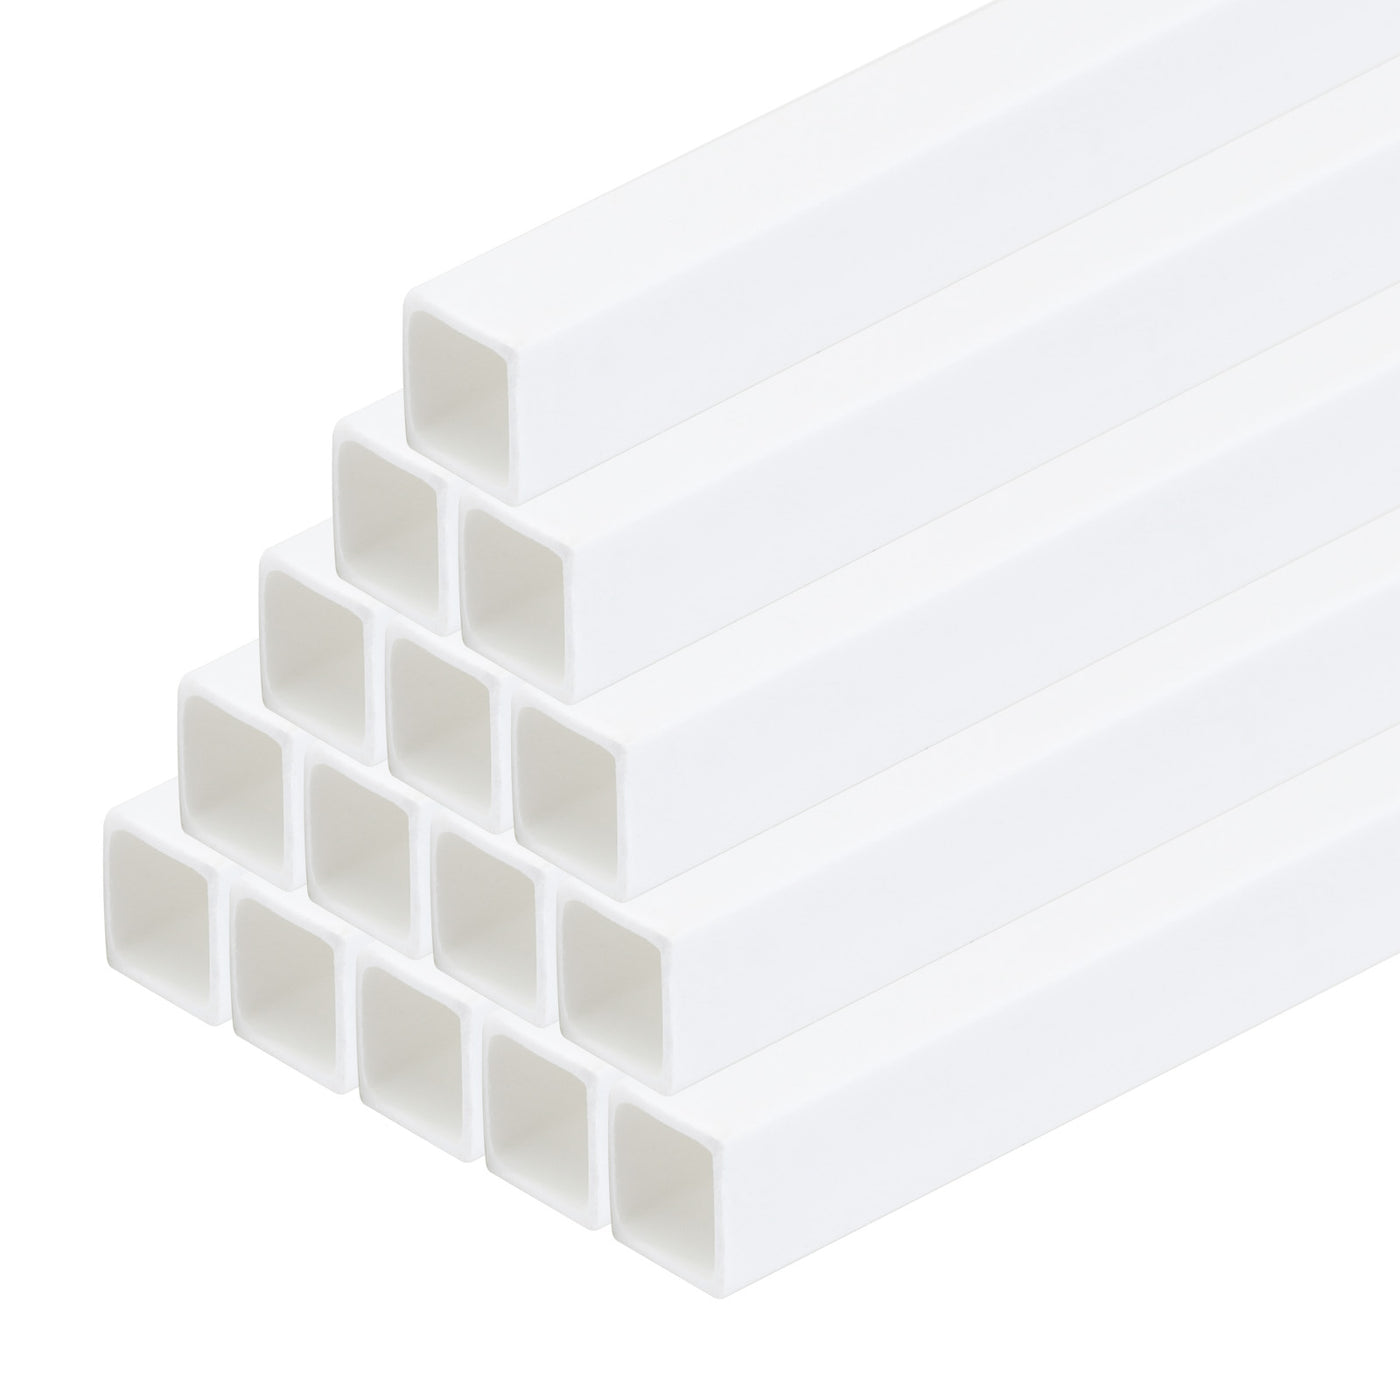 Harfington 20pcs 20" Plastic Model Tube ABS Solid Square Bar 0.31"x0.31" White Easy Processing for Architectural Model Making DIY